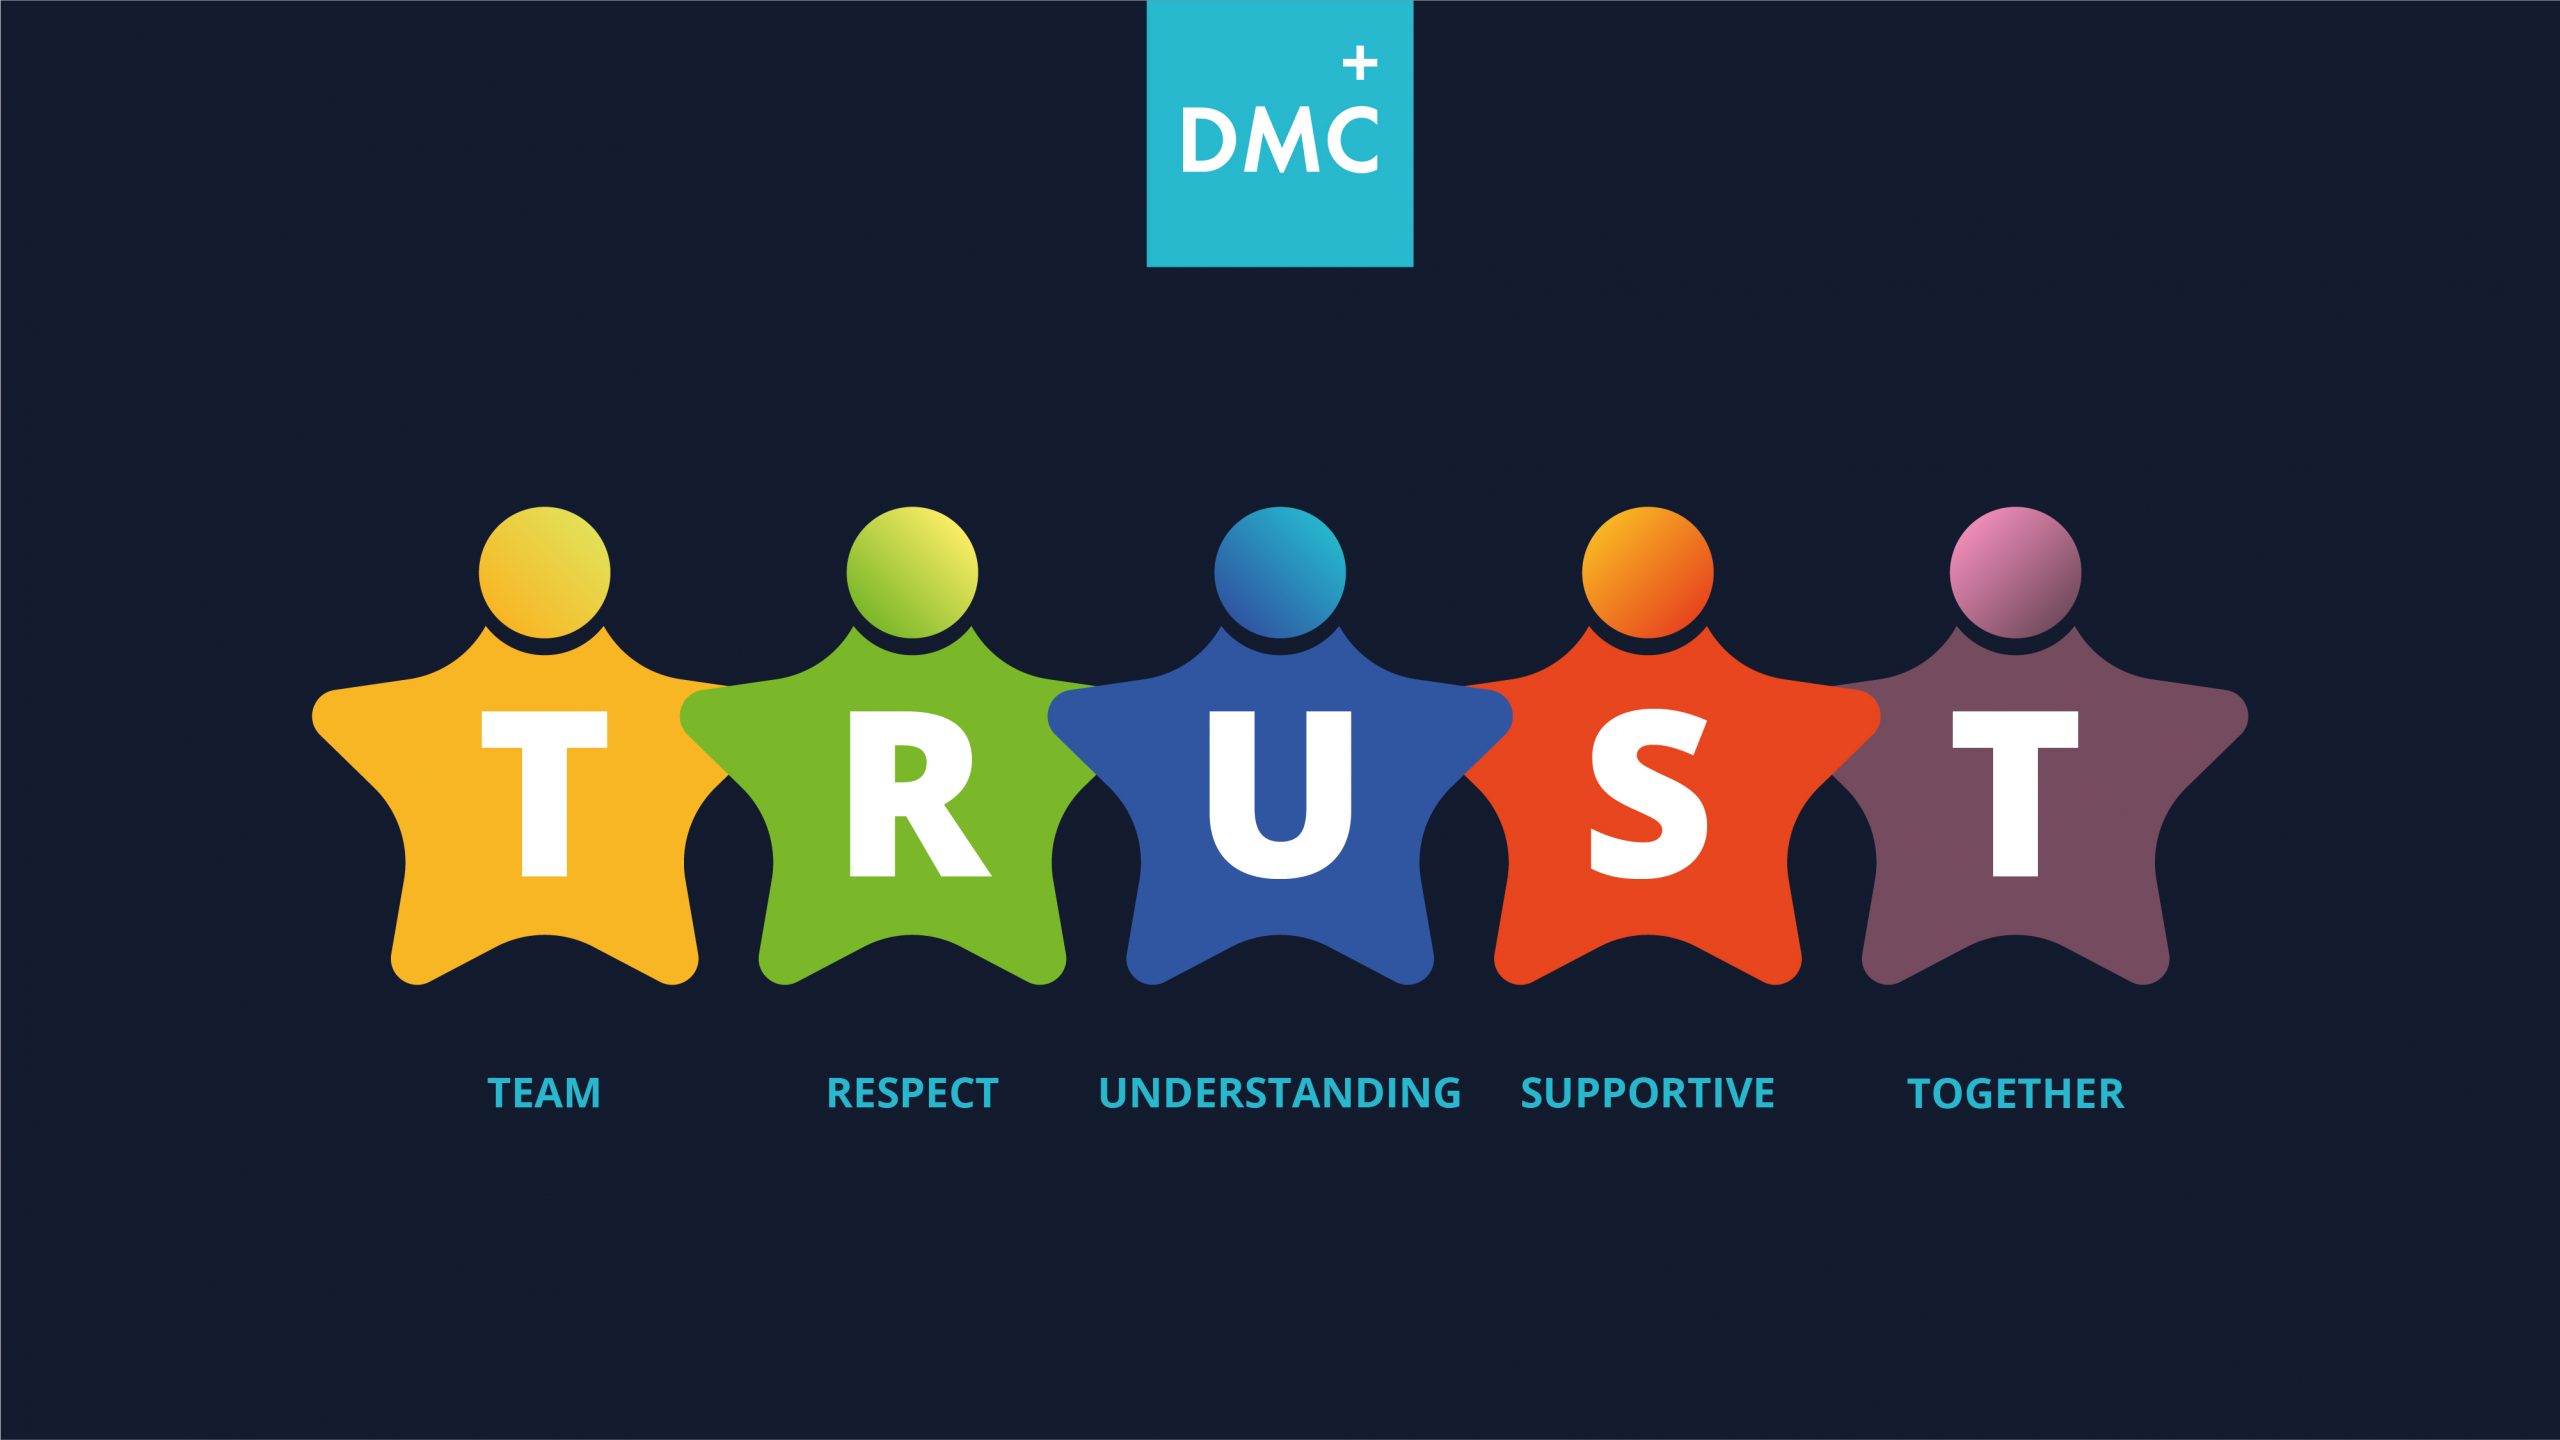 News | DMC Healthcare launches its new internal values – TRUST